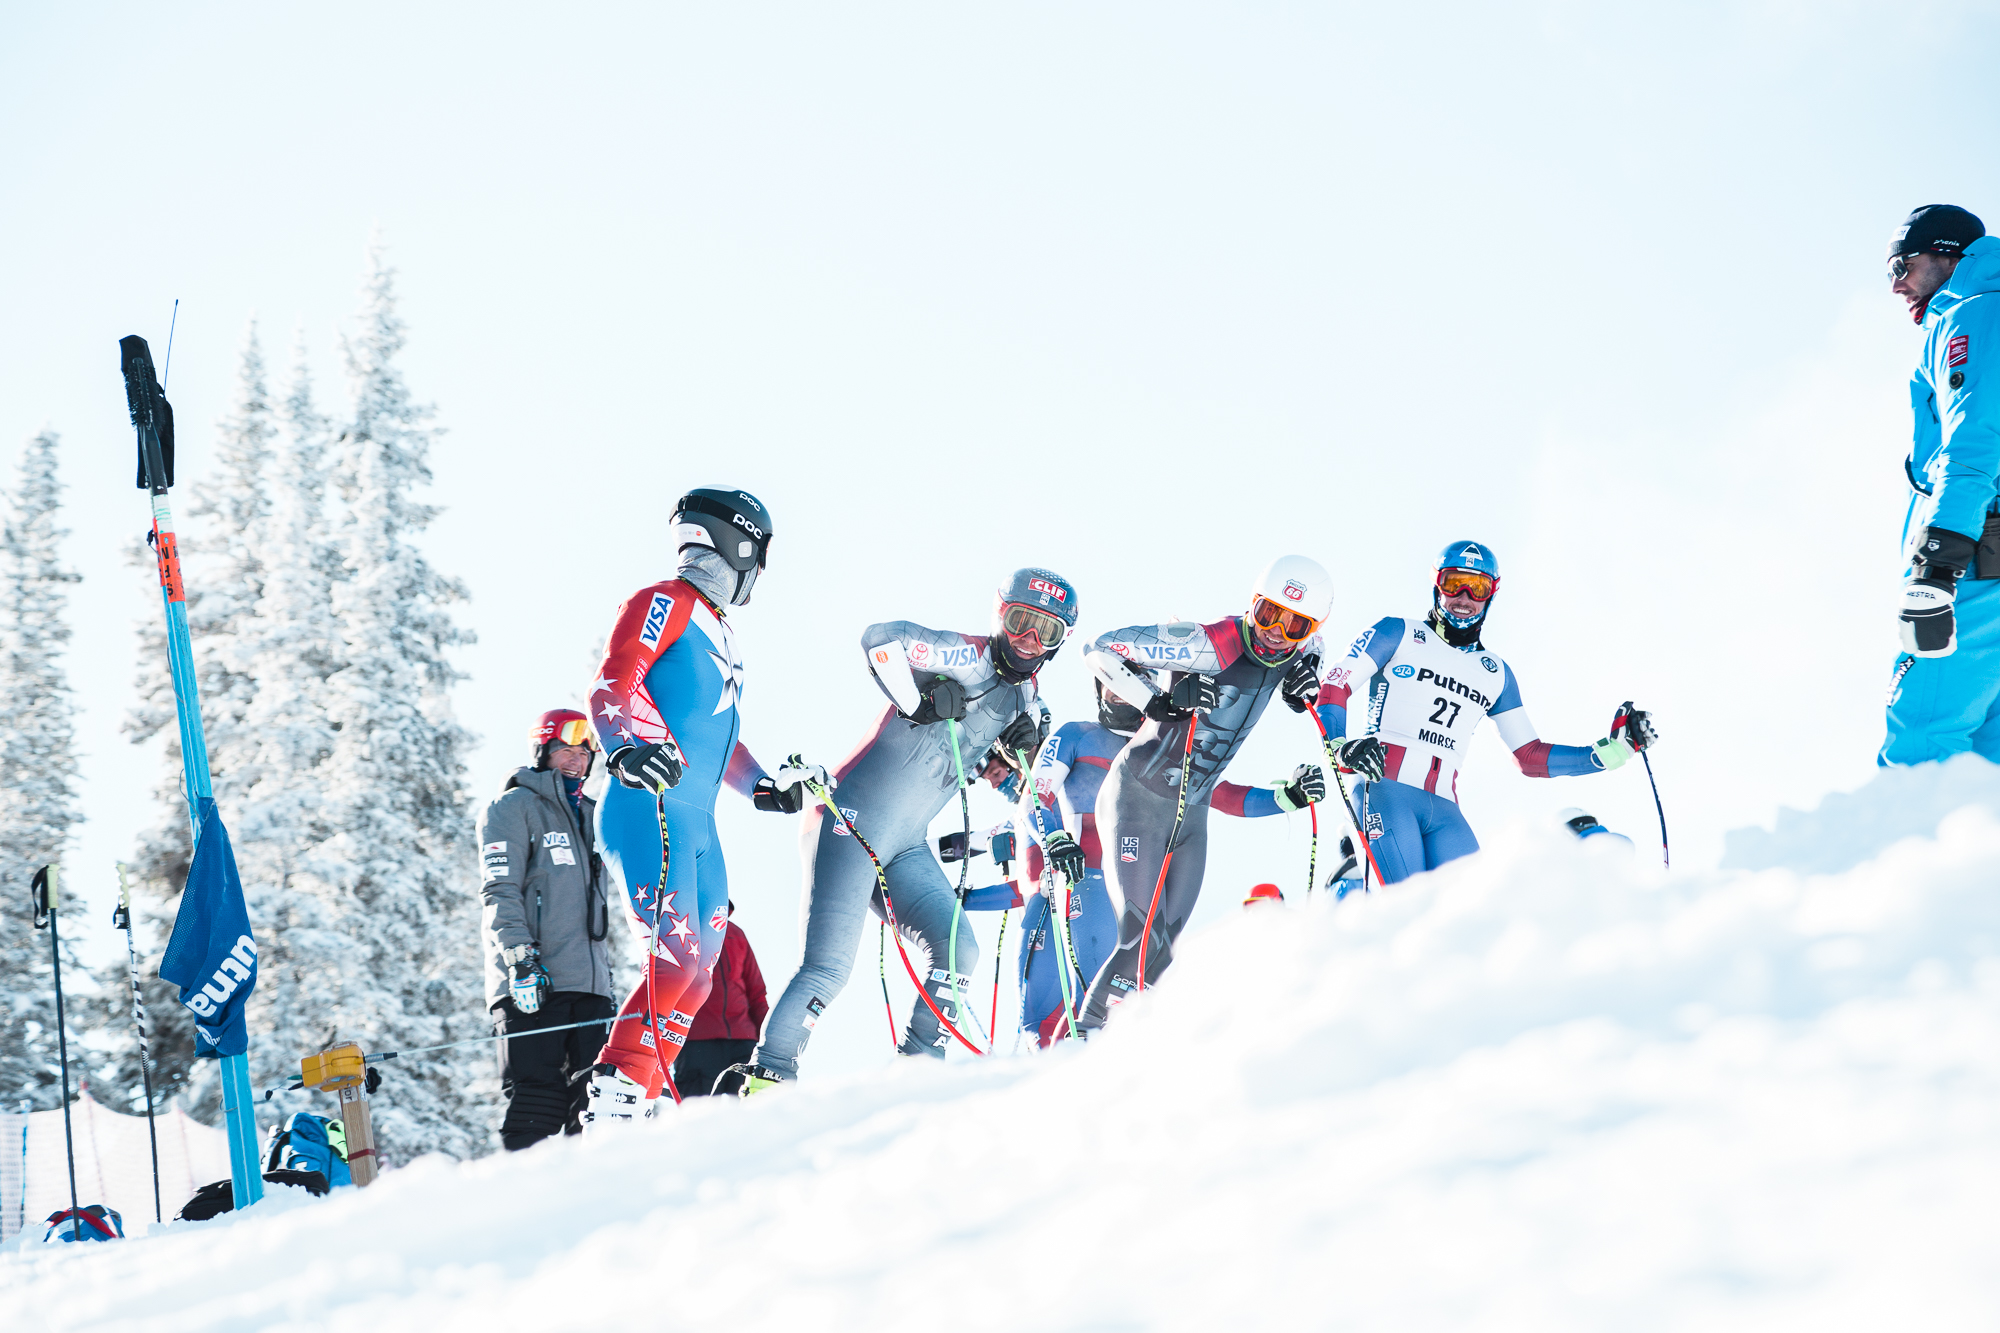 Men's Speed Team Trains in at our U.S. Ski Team Speed Center at Copper Mountain